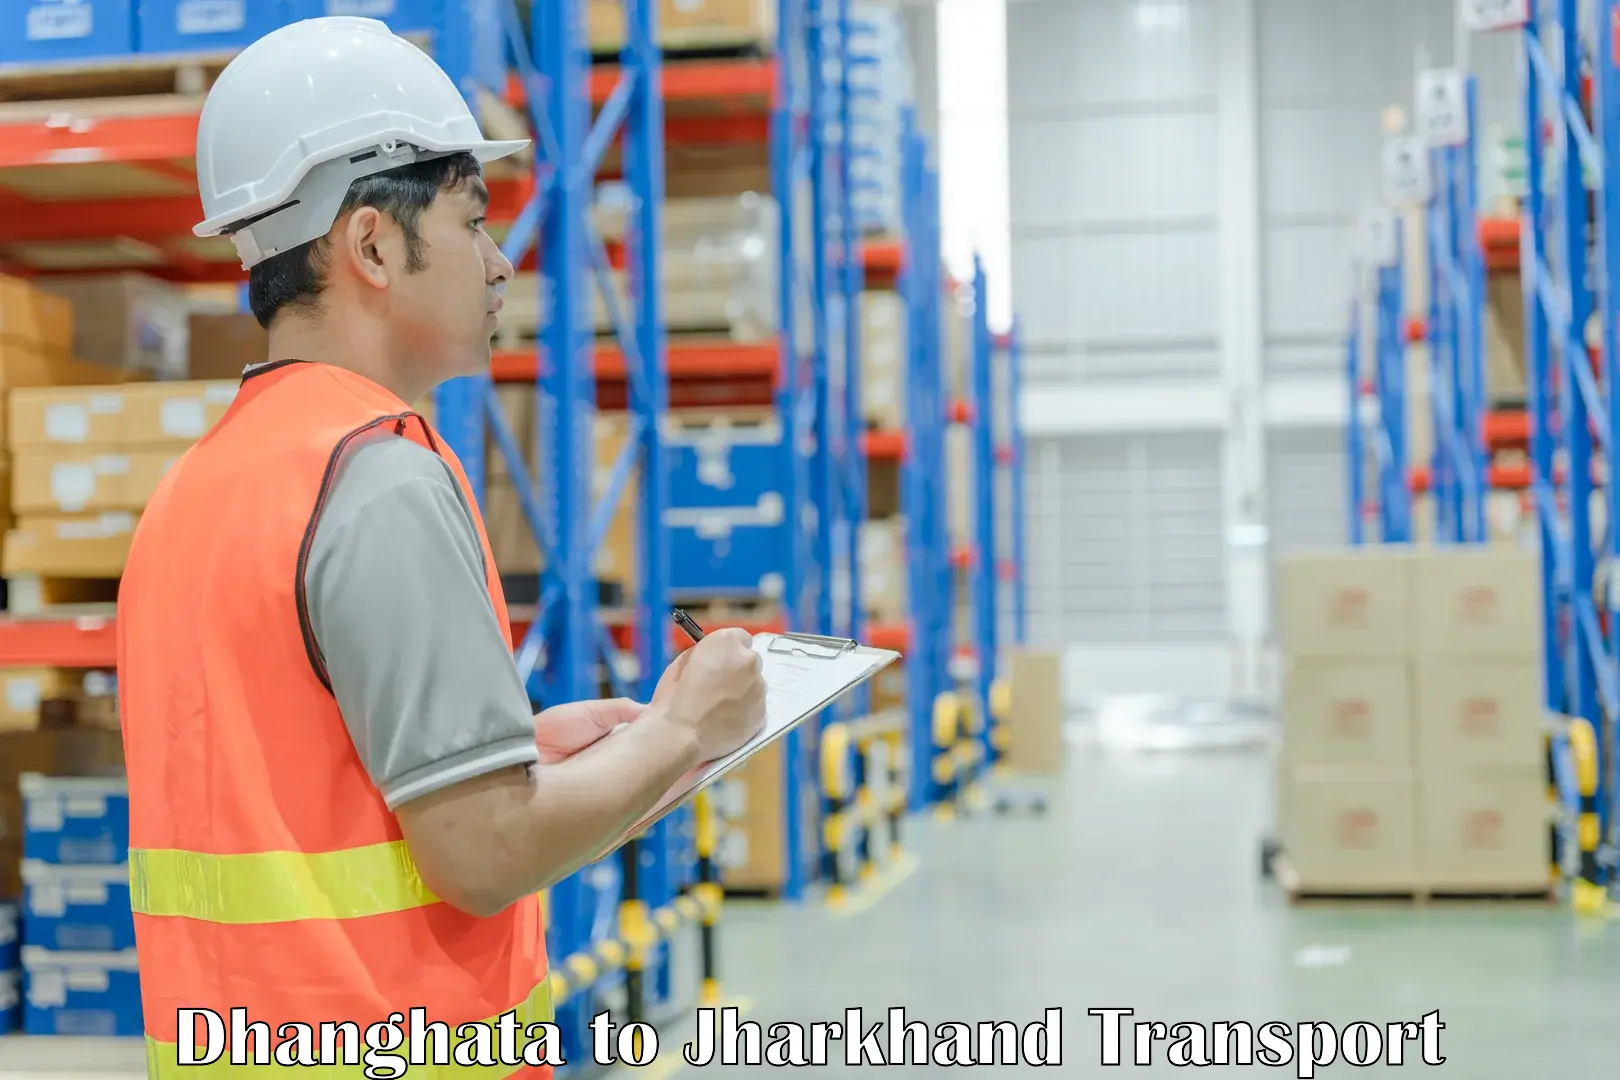 Domestic goods transportation services in Dhanghata to Dhalbhumgarh